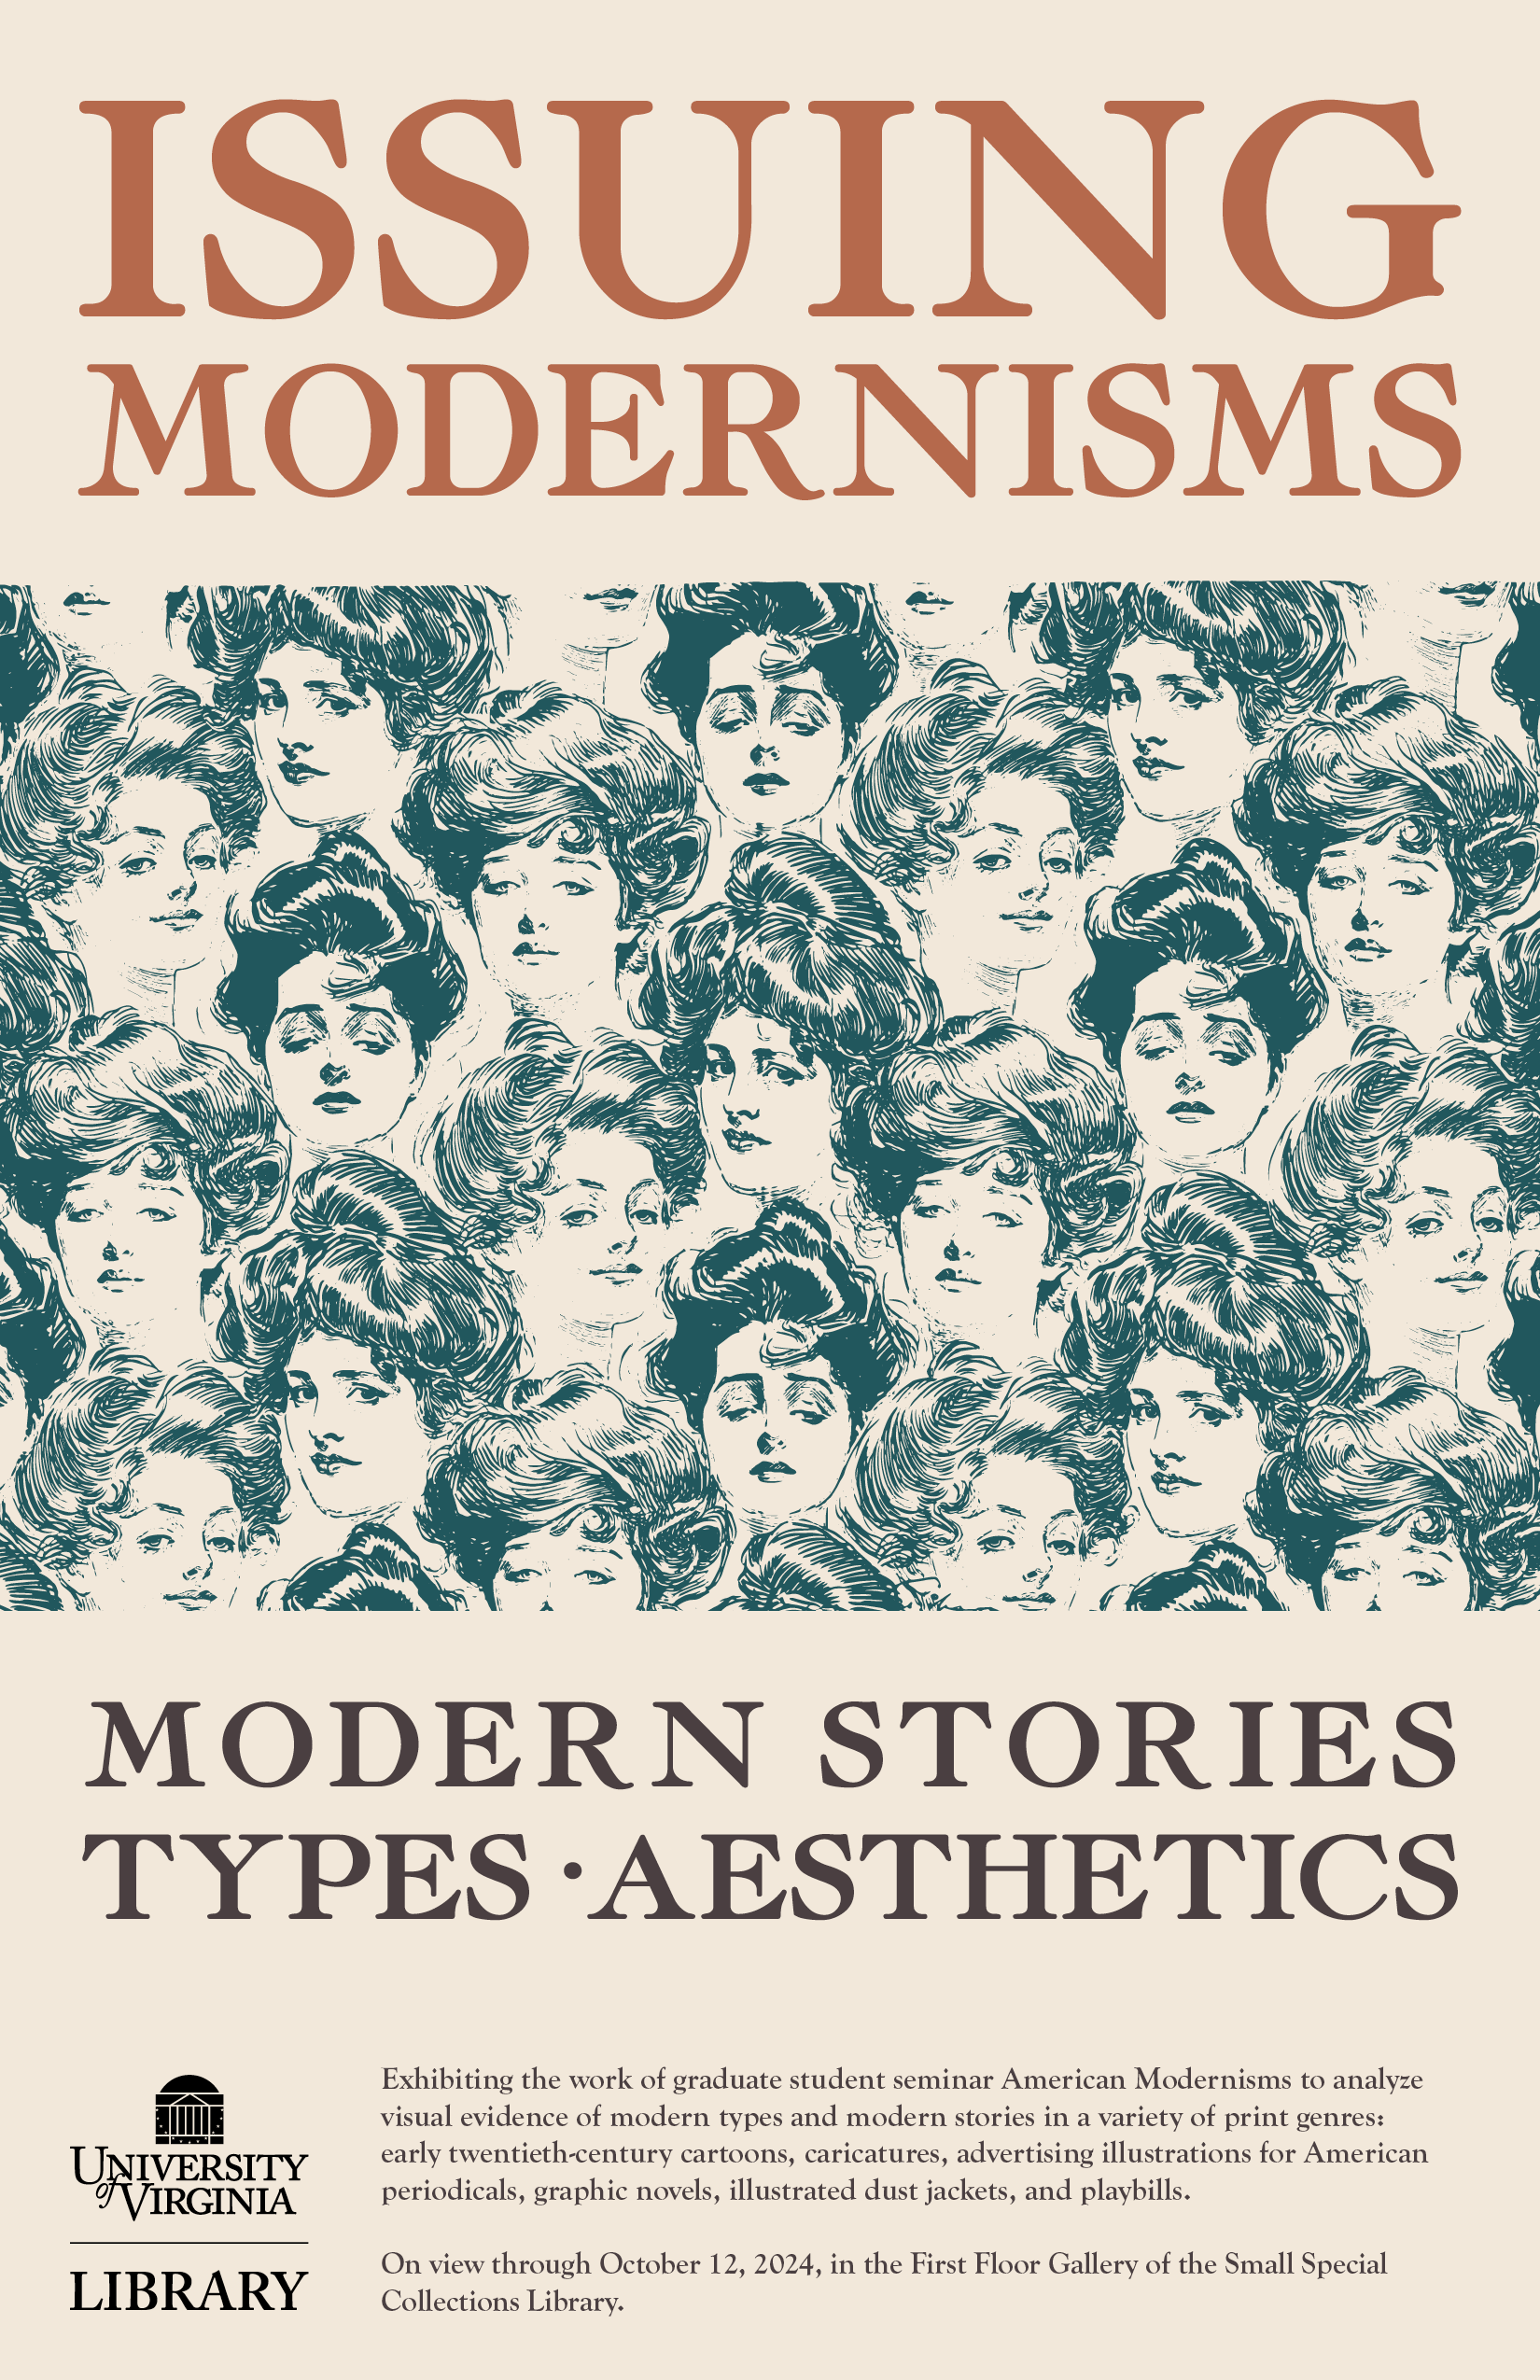 Poster for Issuing Modernisms: Modern Stories, Types, Aesthetics featuring a repeating design of Gibson Girl caricatures